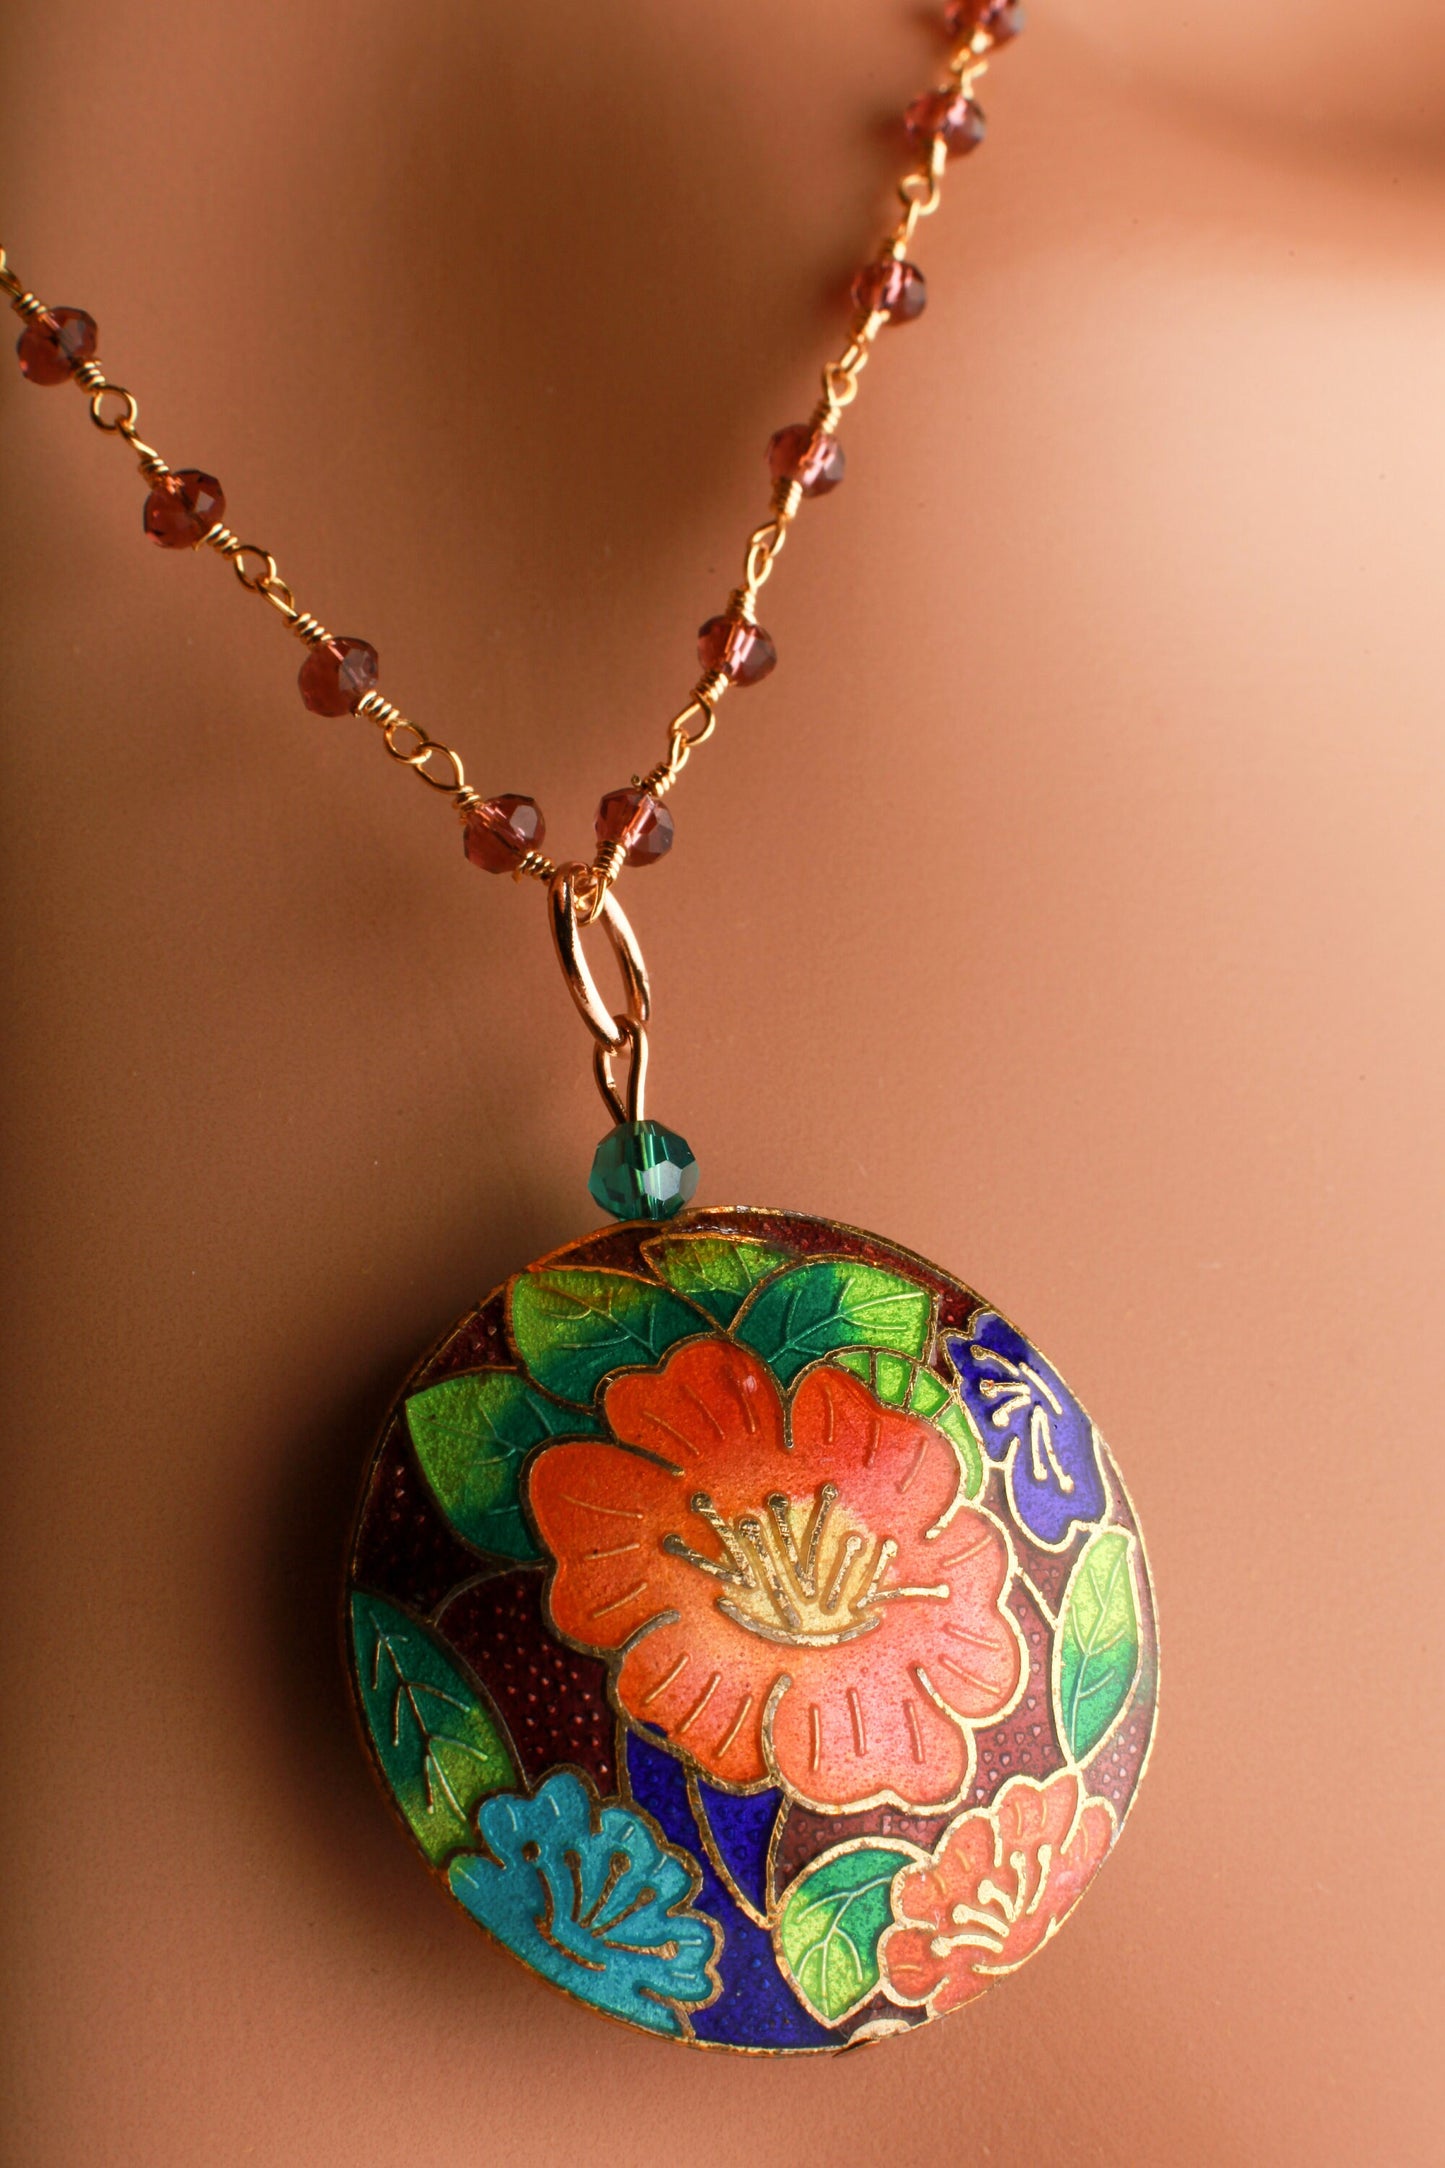 Traditional Cloisonné Pendant Vintage Floral Flowers Focal with Gold Plated Beaded Chain Necklace 20" and matching Leverback Earrings set